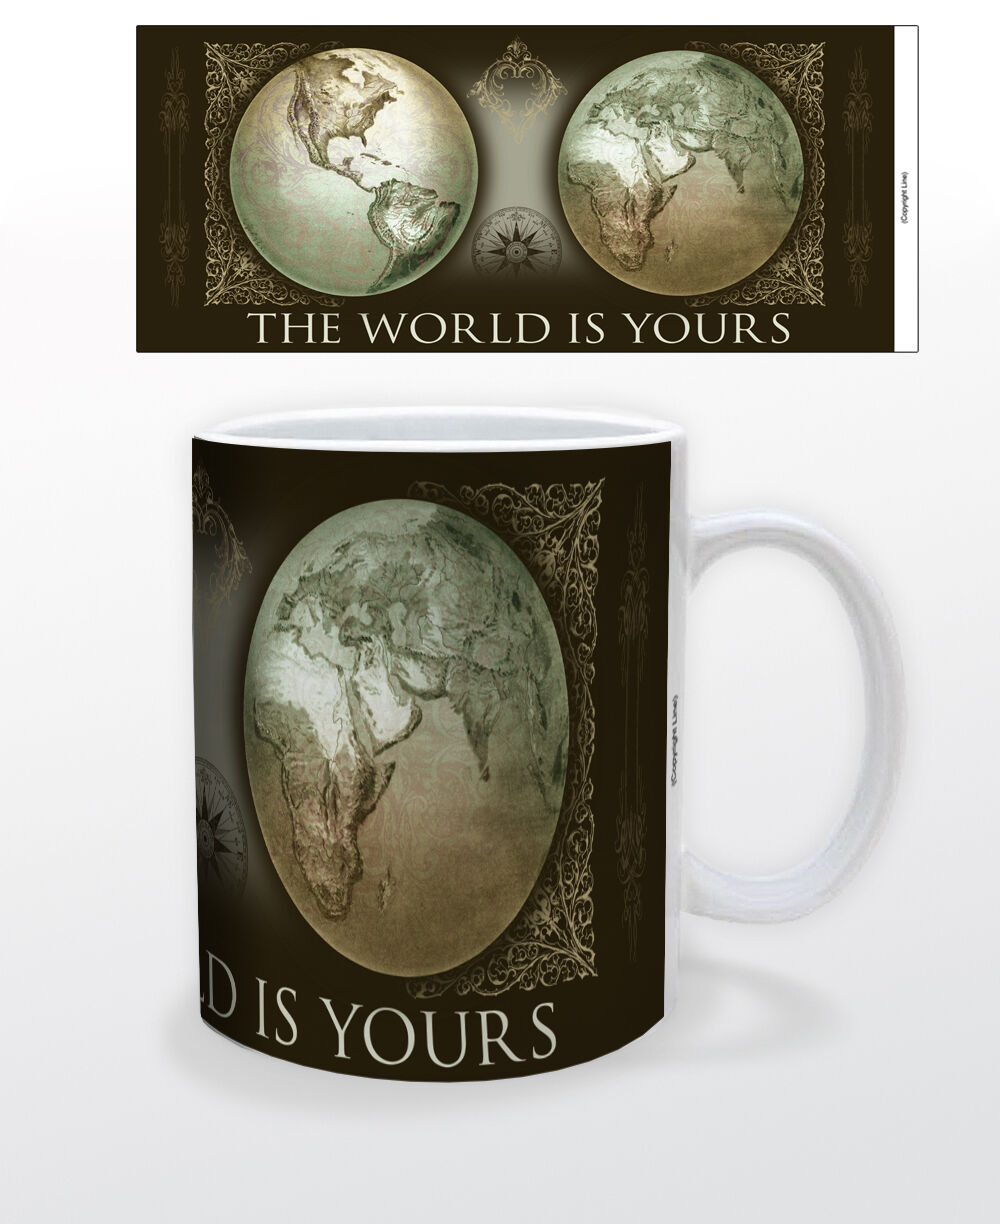 THE WORLD IS YOURS 11 OZ COFFEE MUG TEA CUP ART DECOR MAP INSPIRATION QUOTE FUN